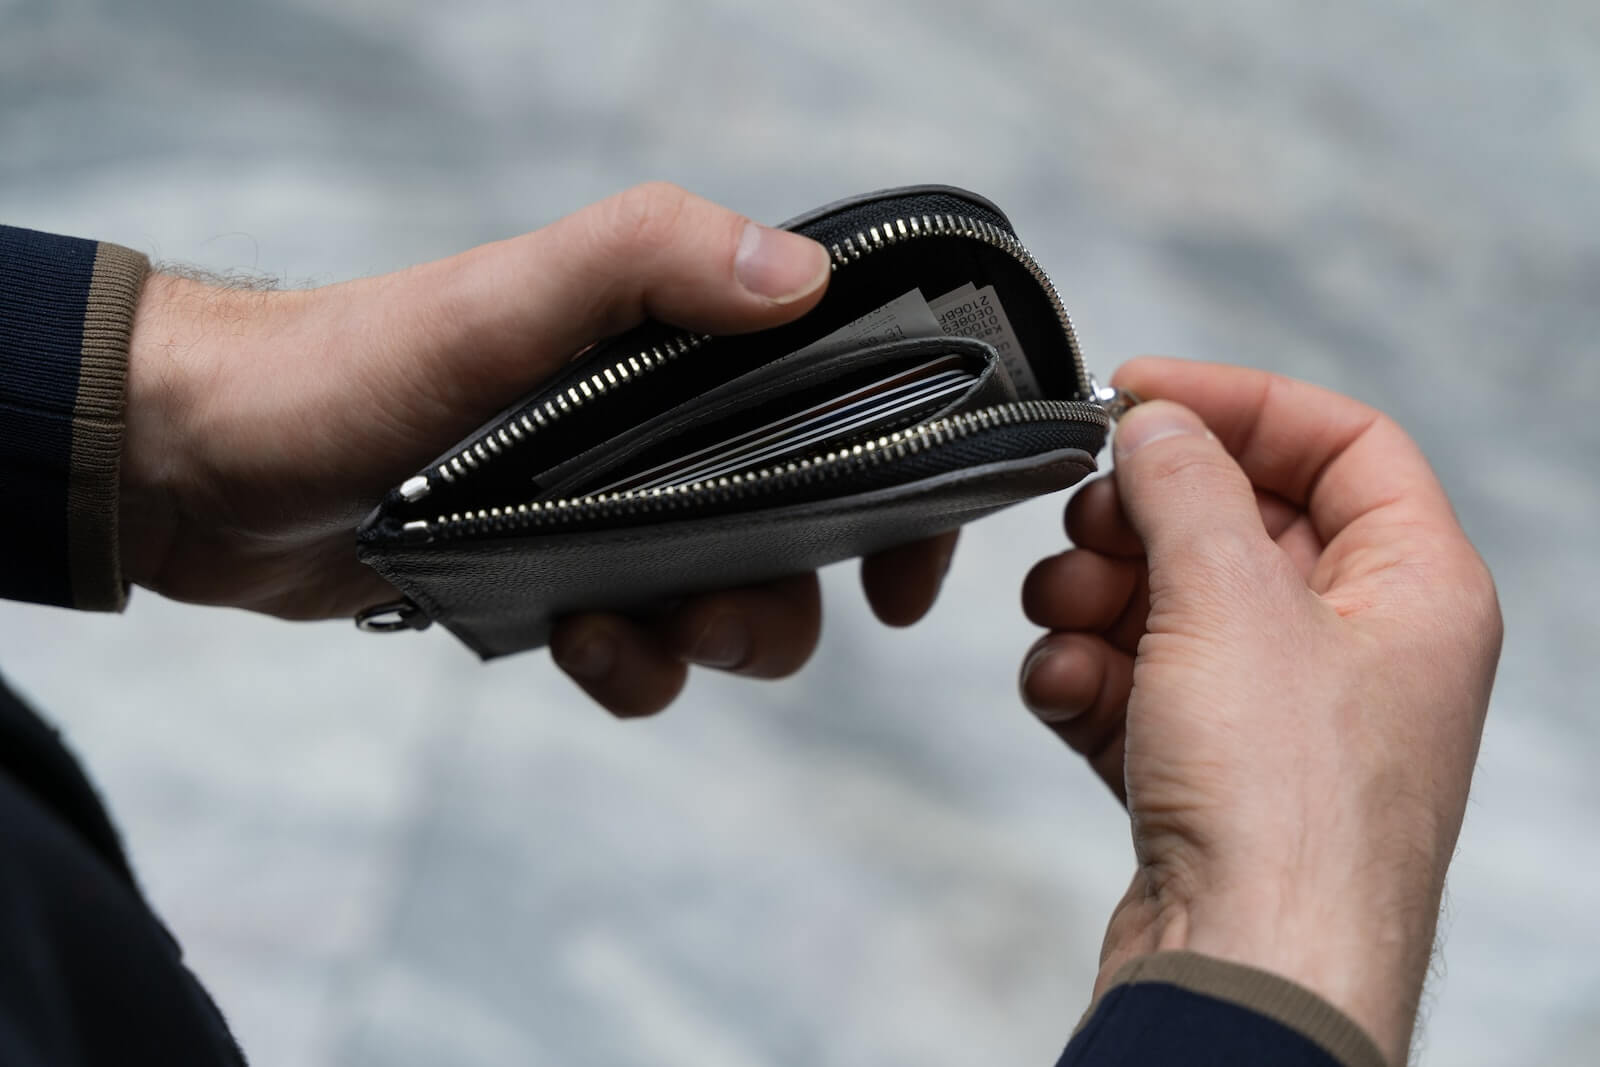 10 Best Smart Wallets in 2023, According to Tech Experts